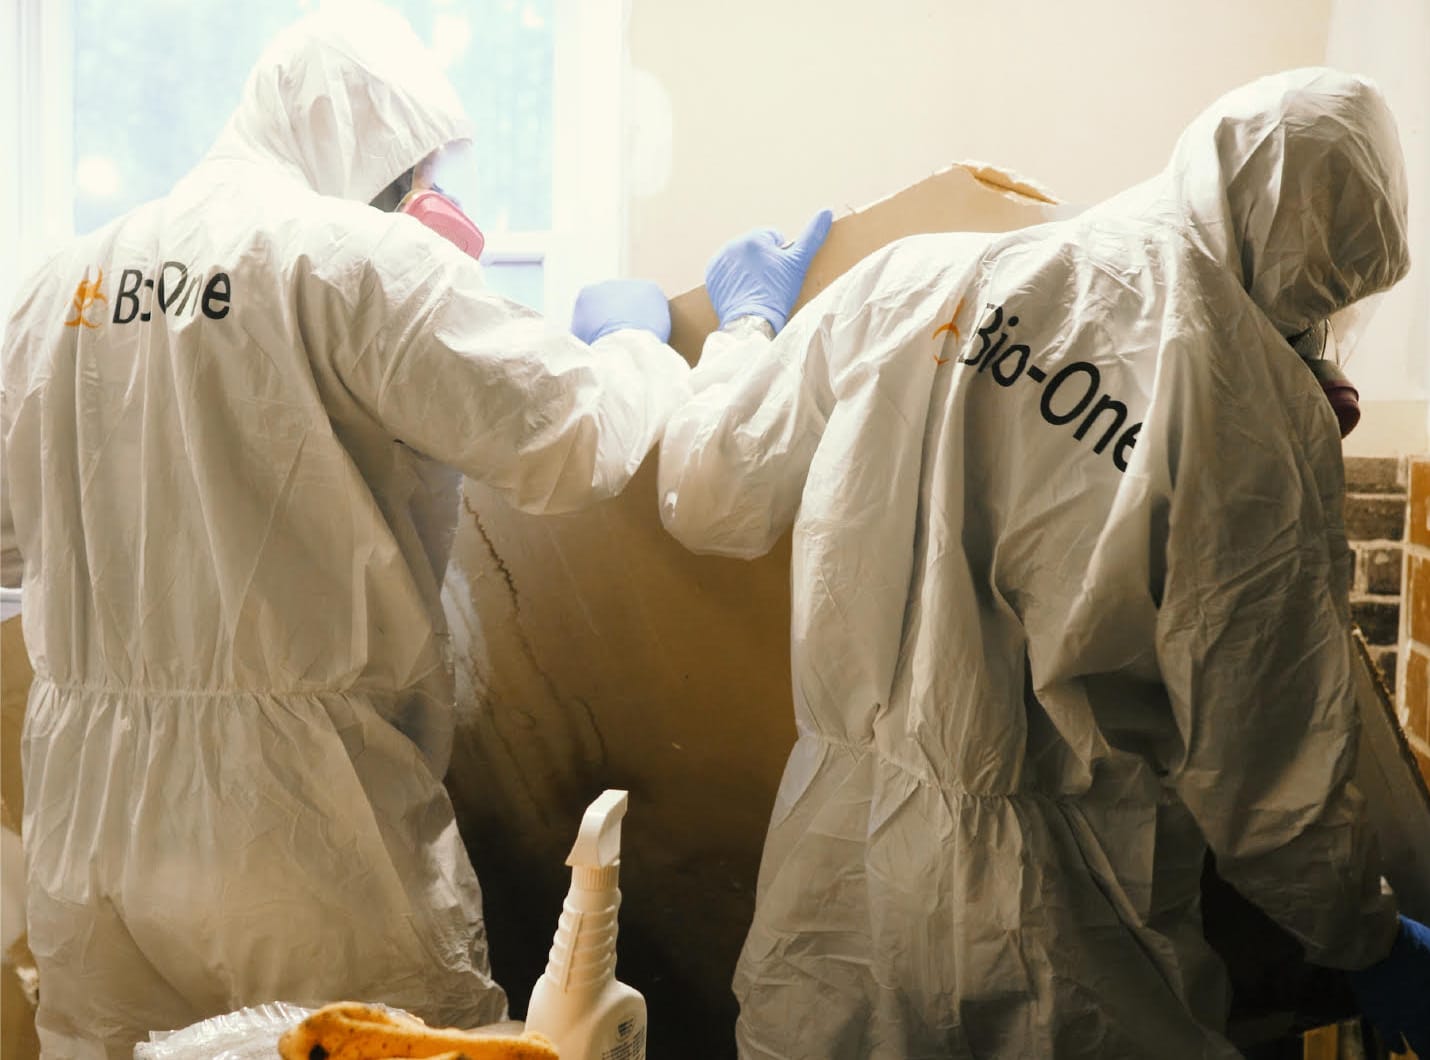 Death, Crime Scene, Biohazard & Hoarding Clean Up Services for Whatcom County